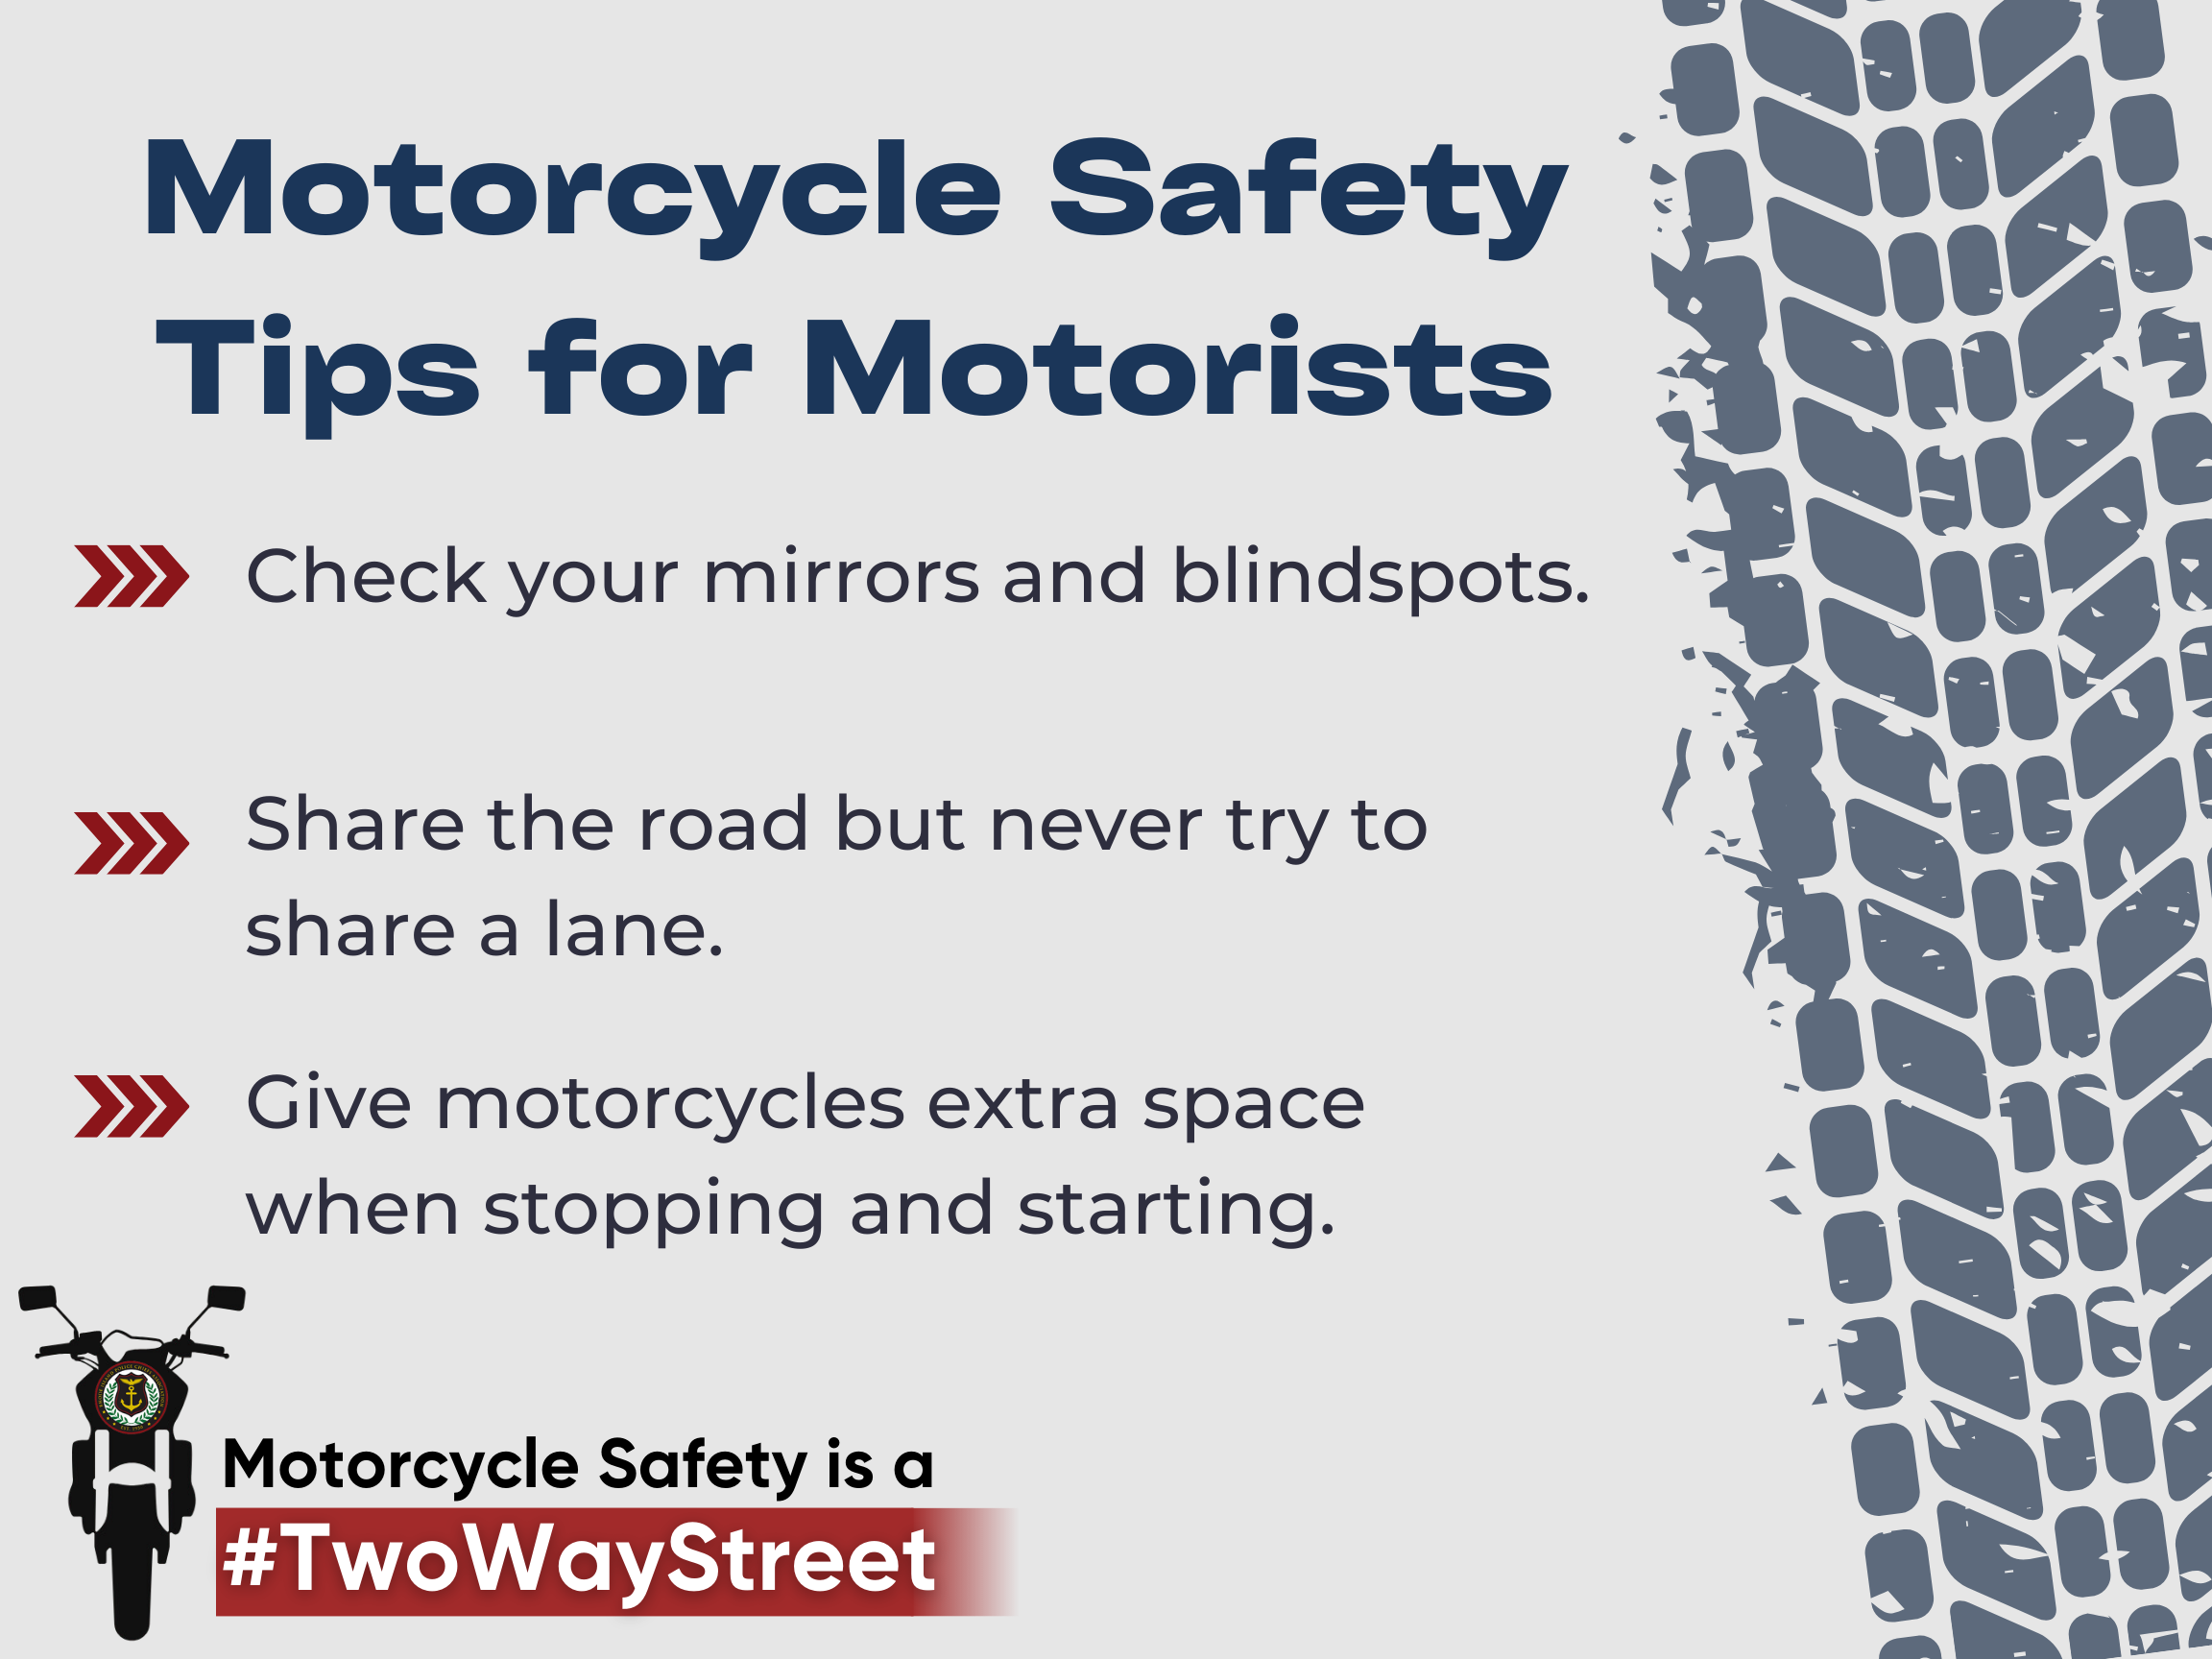 Motorcycle Safety is a #TwoWayStreet